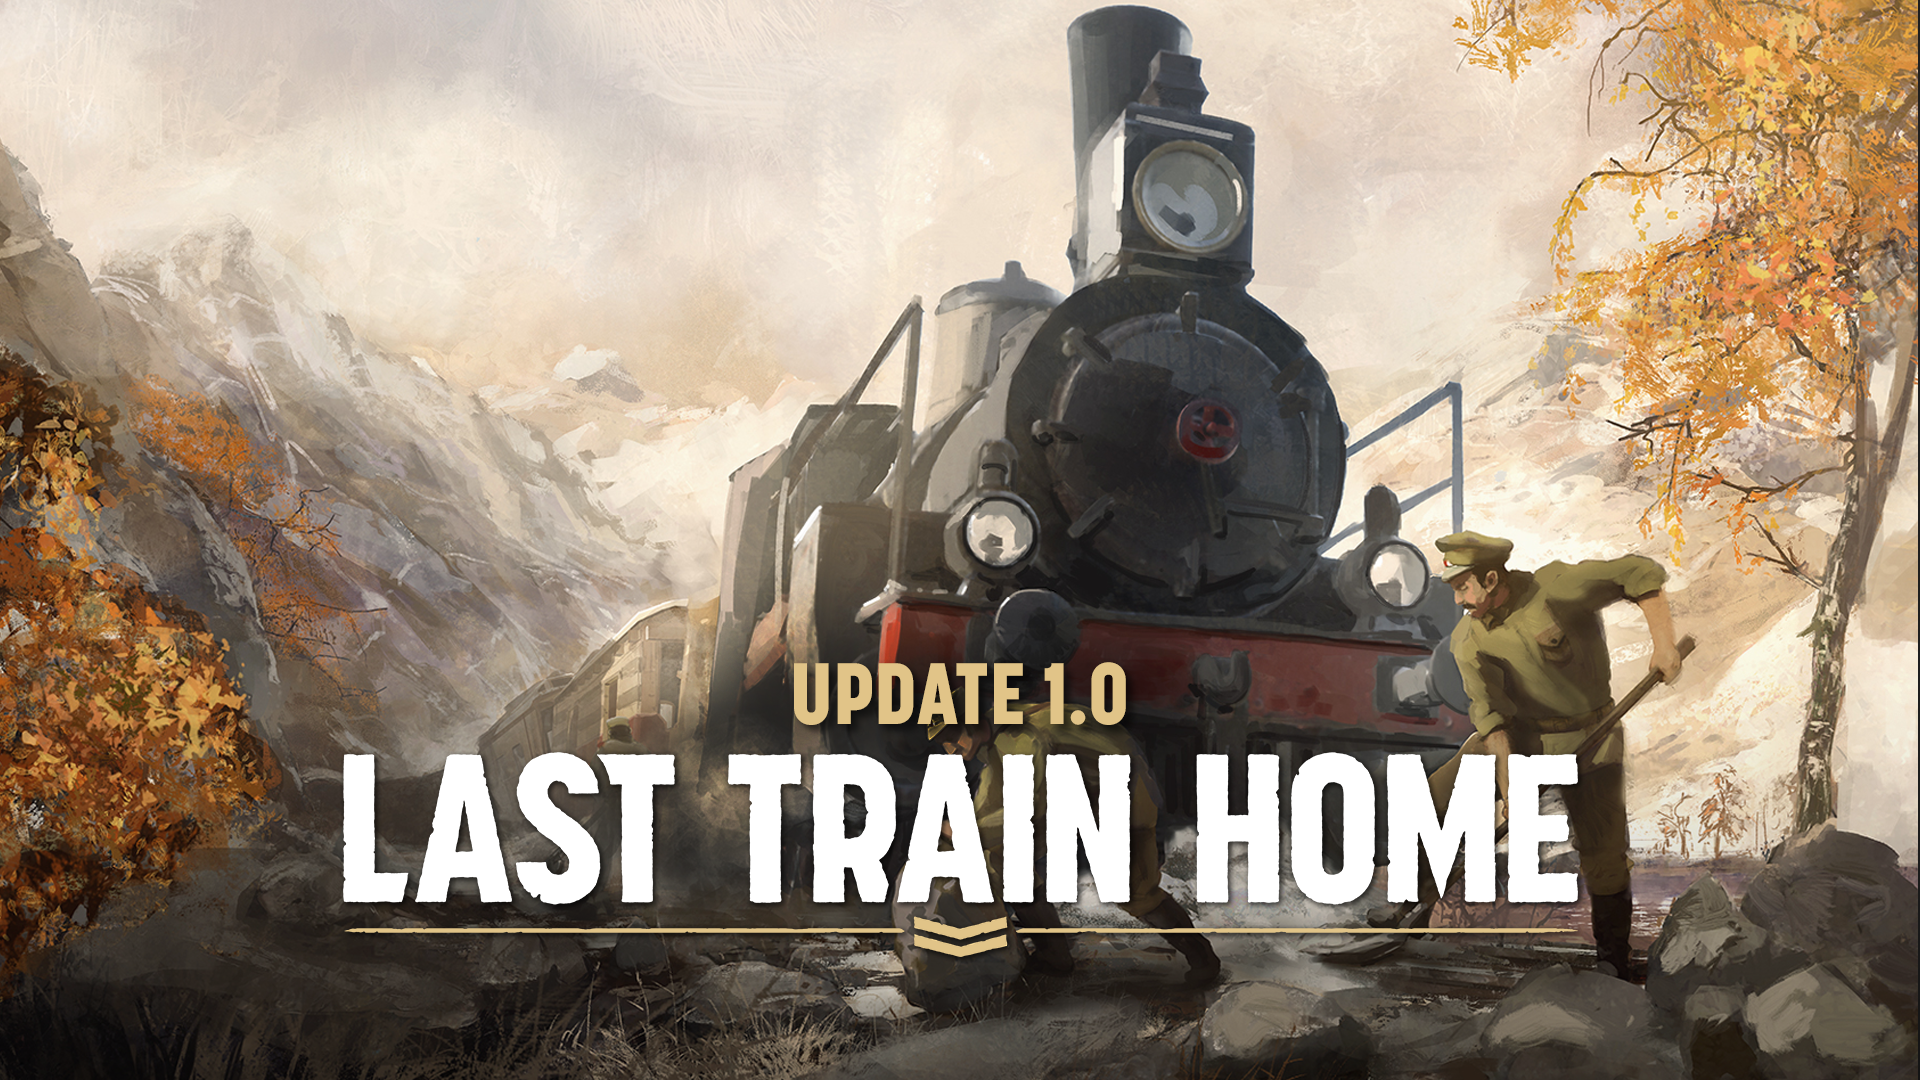 Last Train Home Debuts in 7th on the Steam Charts